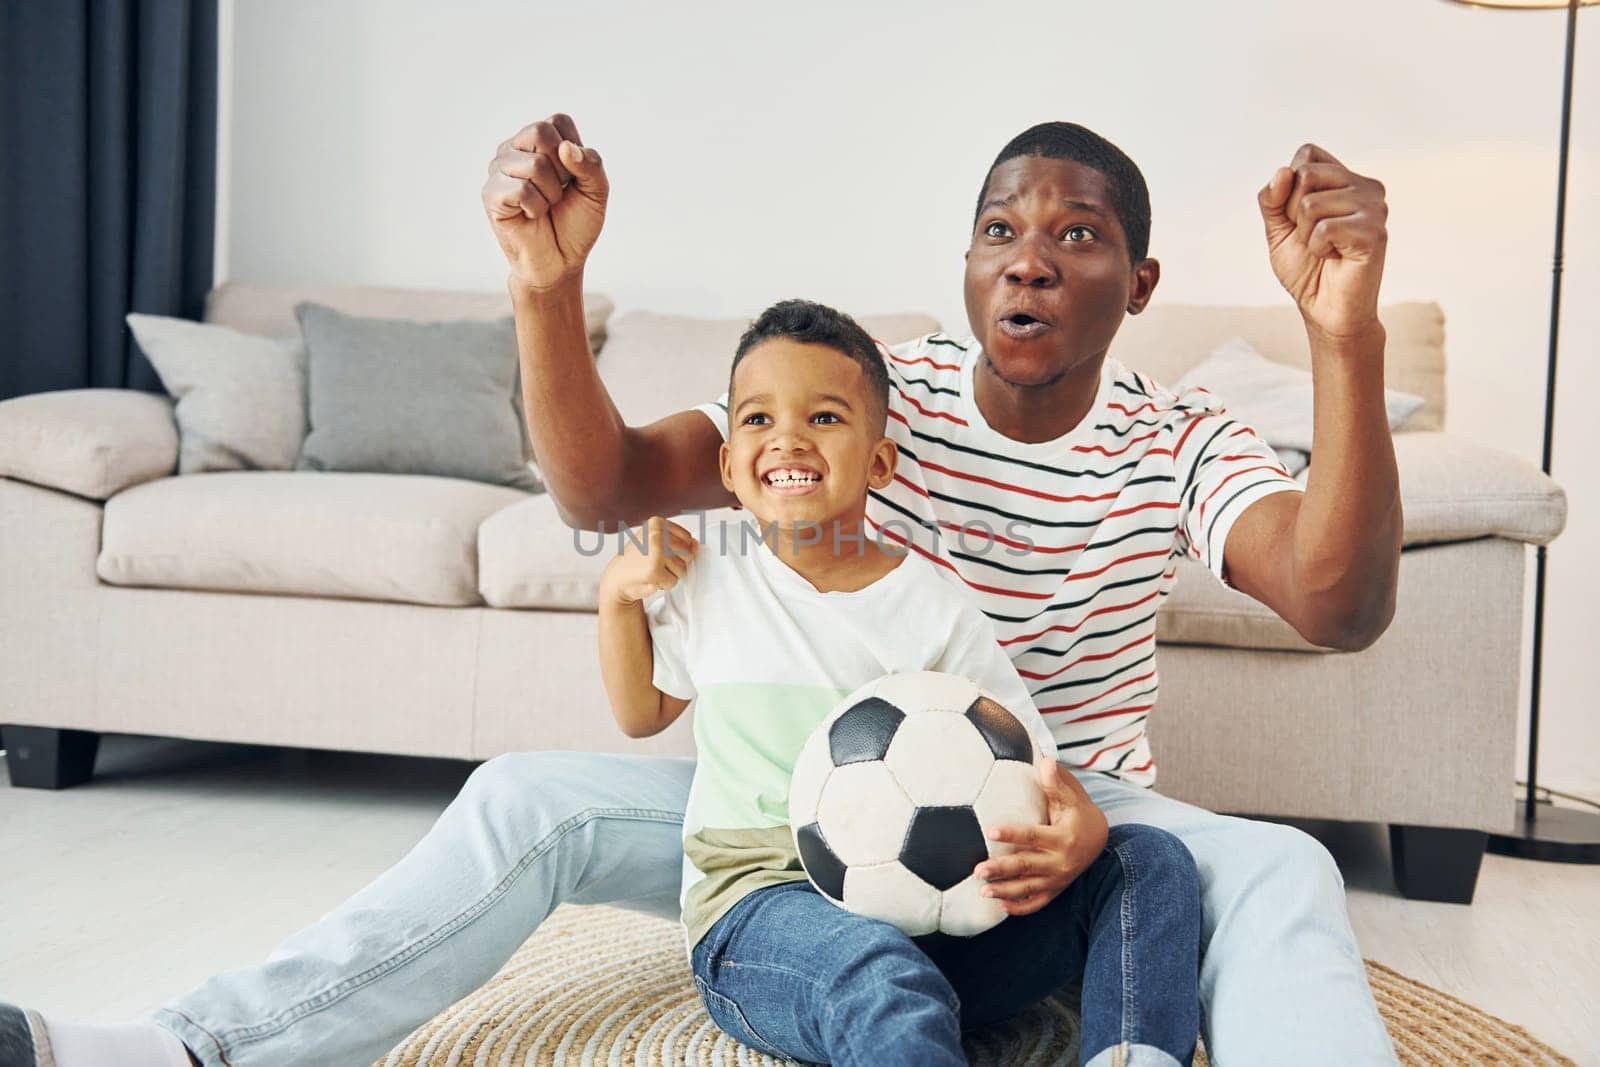 Entertainment for people. African american father with his young son at home.